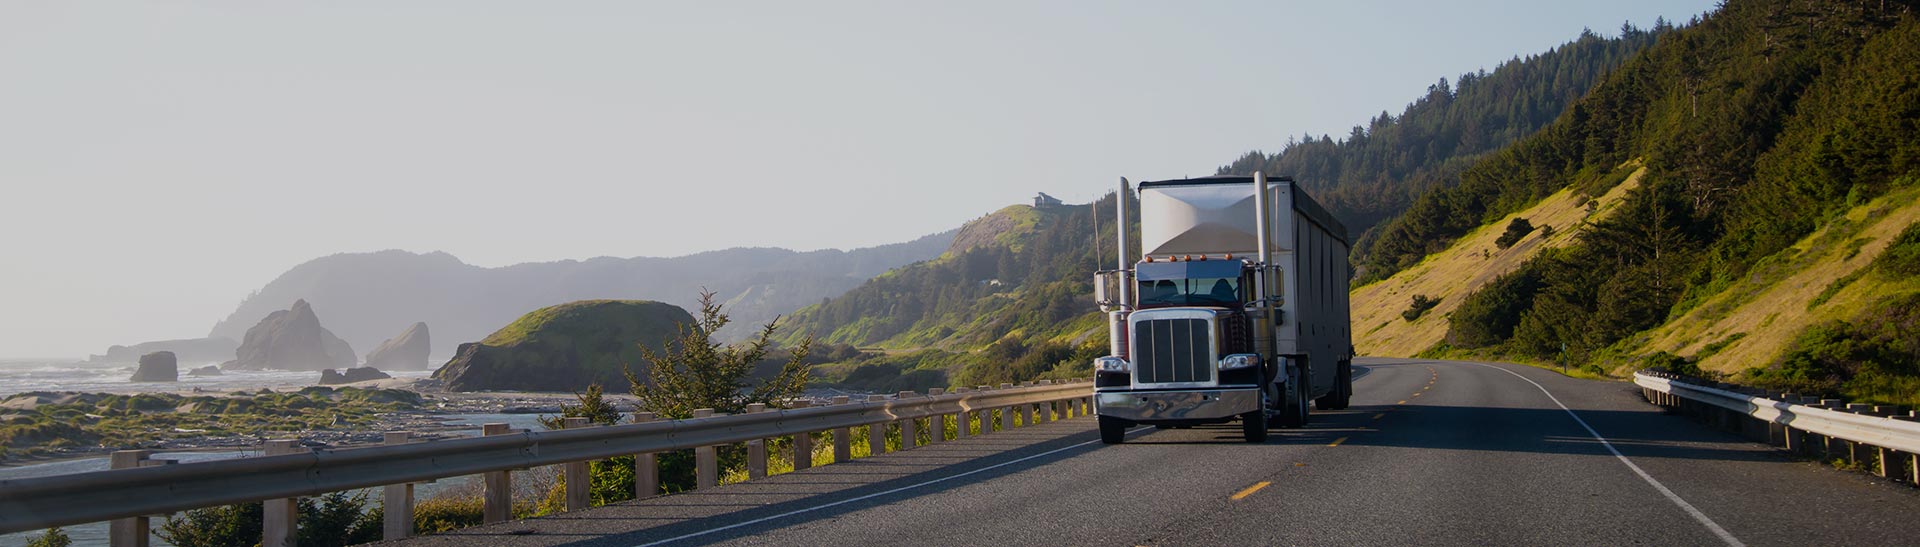 SeaTac Trucking Company, Trucking Services and Freight Forwarding Services